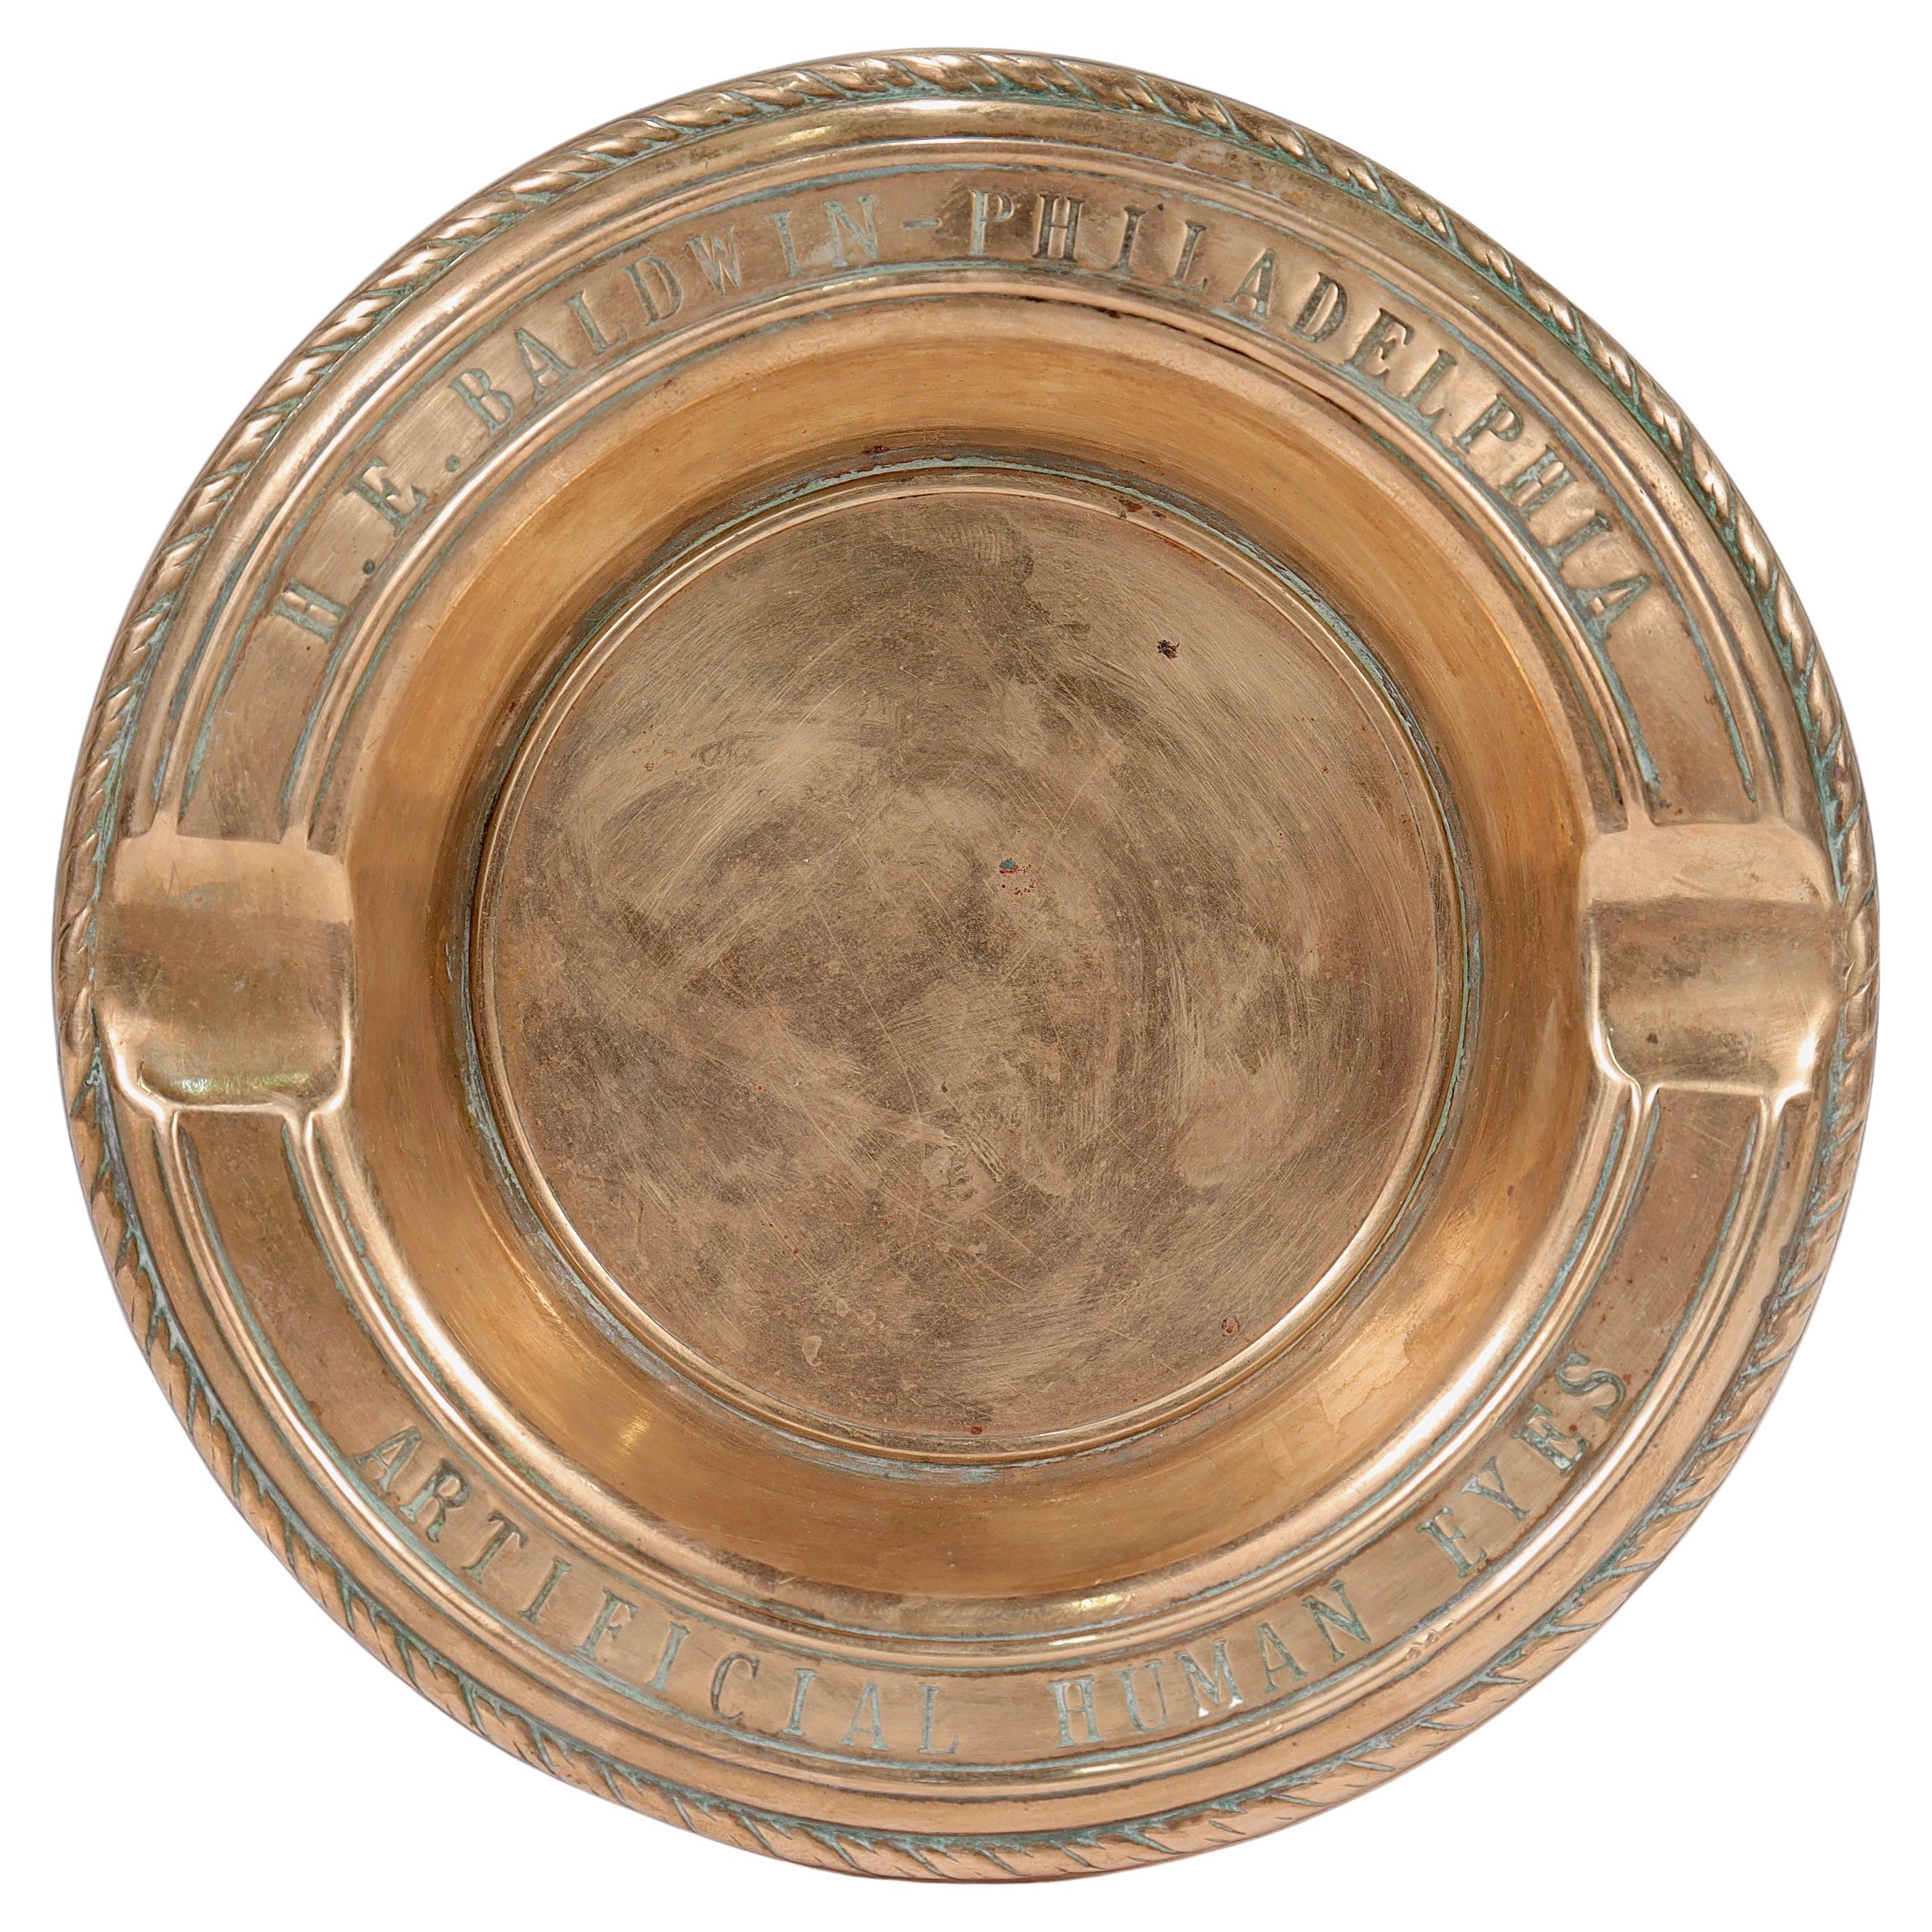 Antique Brass Ashtray Advertising a Philadelphia Dealer in Artificial Human Eyes For Sale